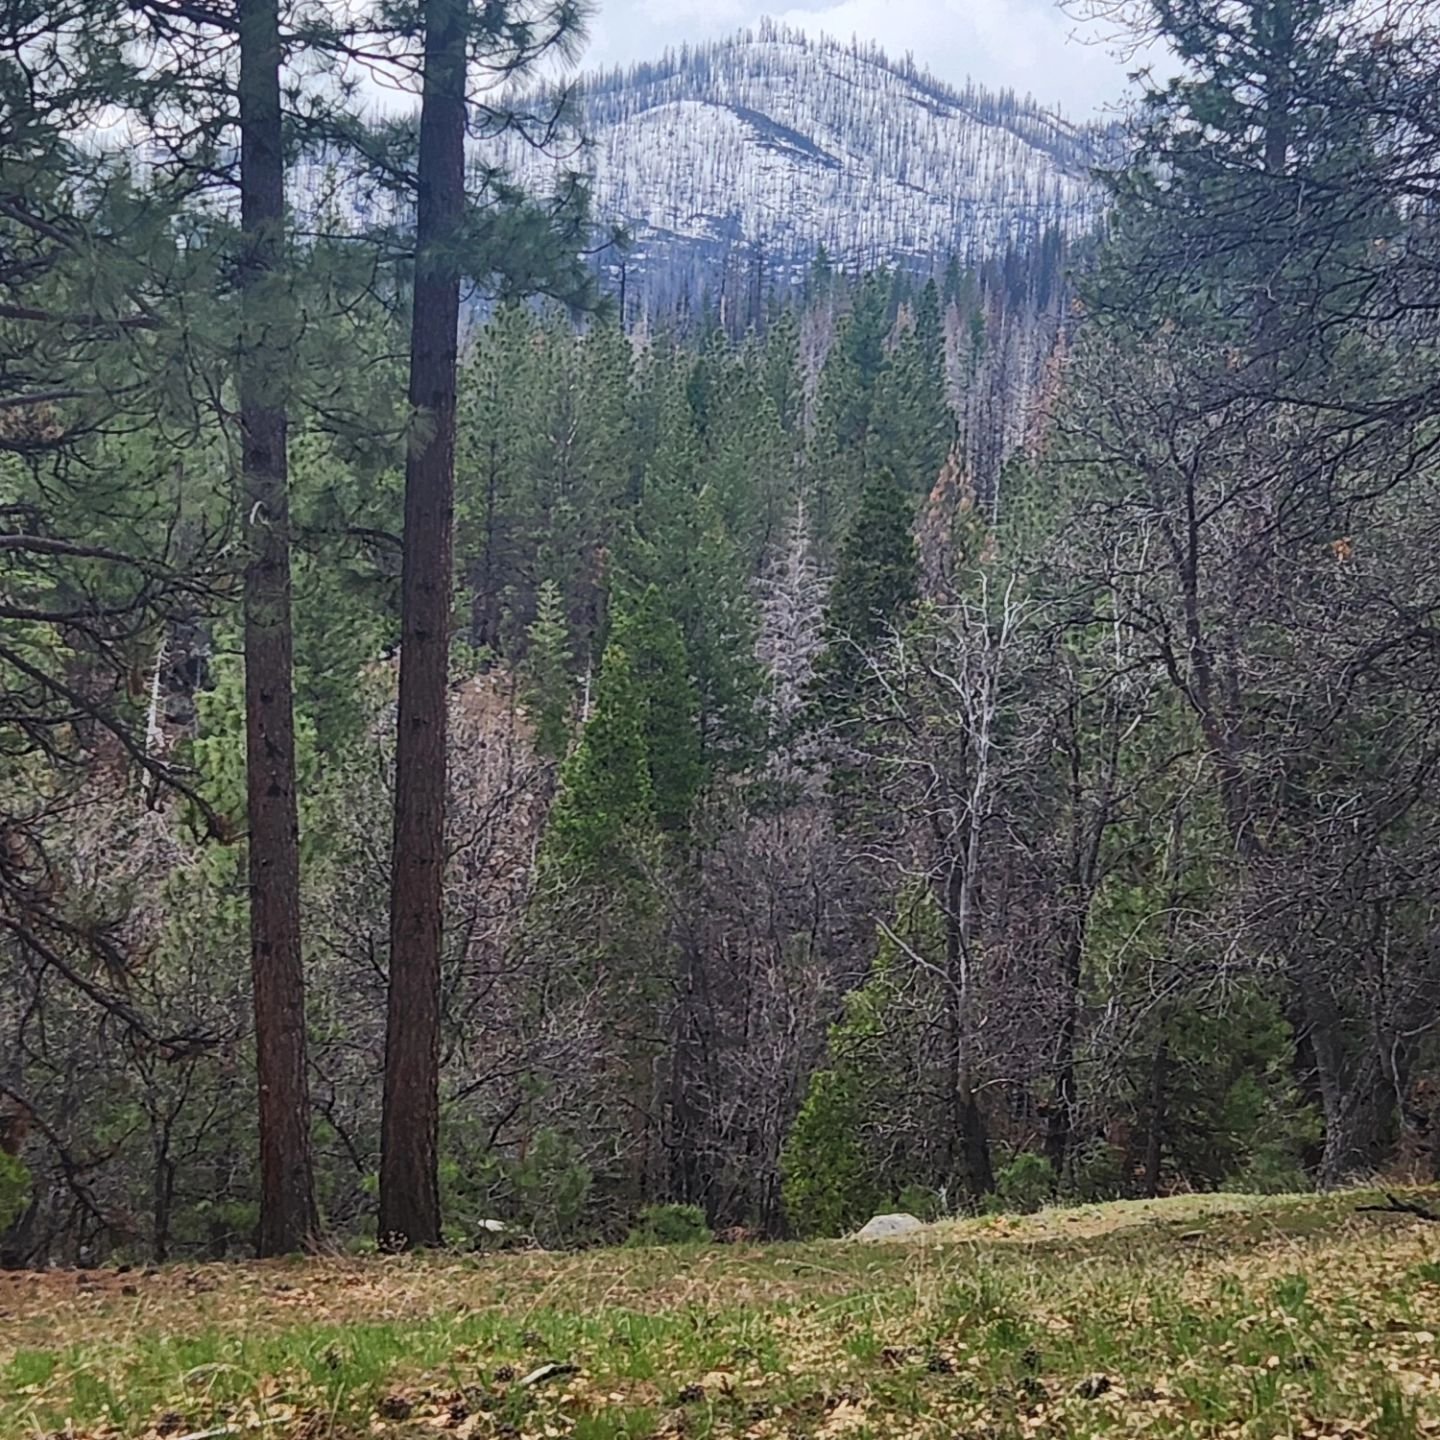 Here at the cabin on the cusp of winter and spring. Beautiful. 

# MountainBeauty #cabinlife #mountainmagic #familymemories #susanvillescenery #springinthemountains